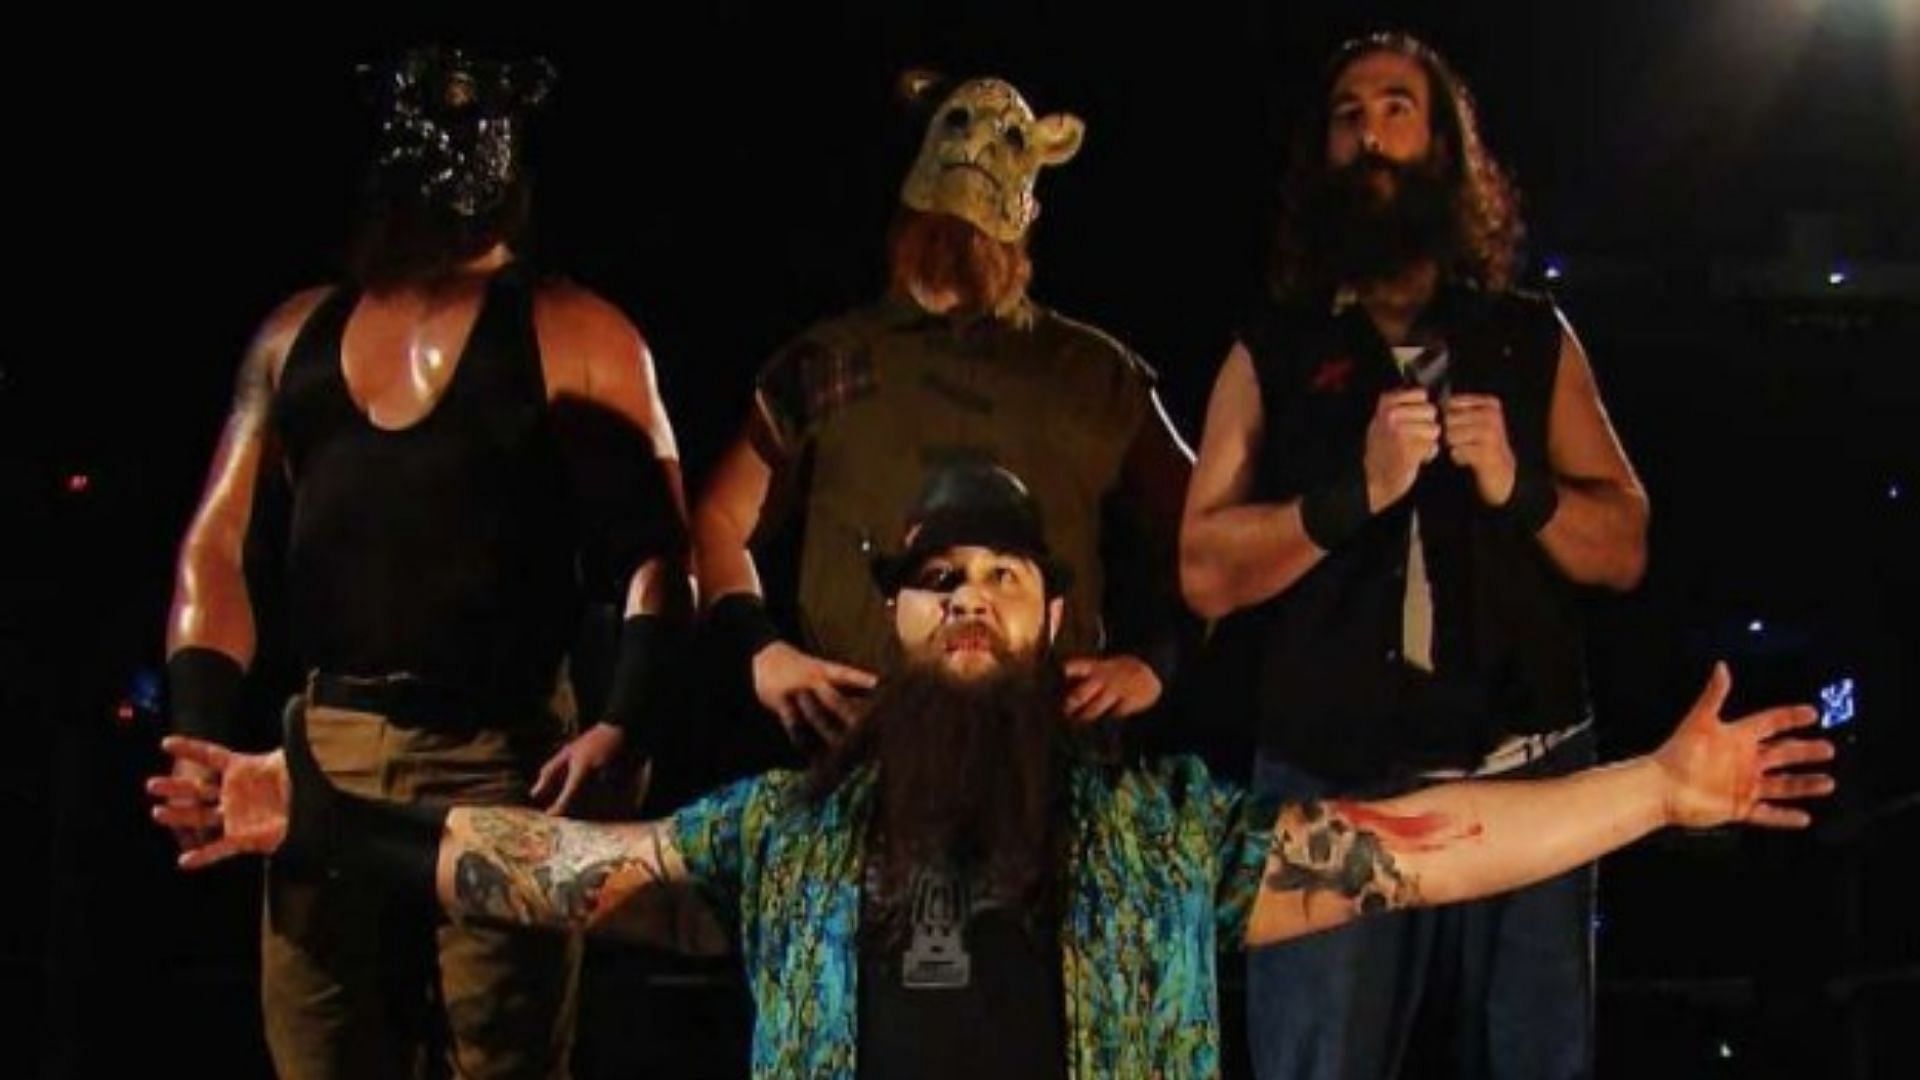 Could this be the return of the Wyatt Family?